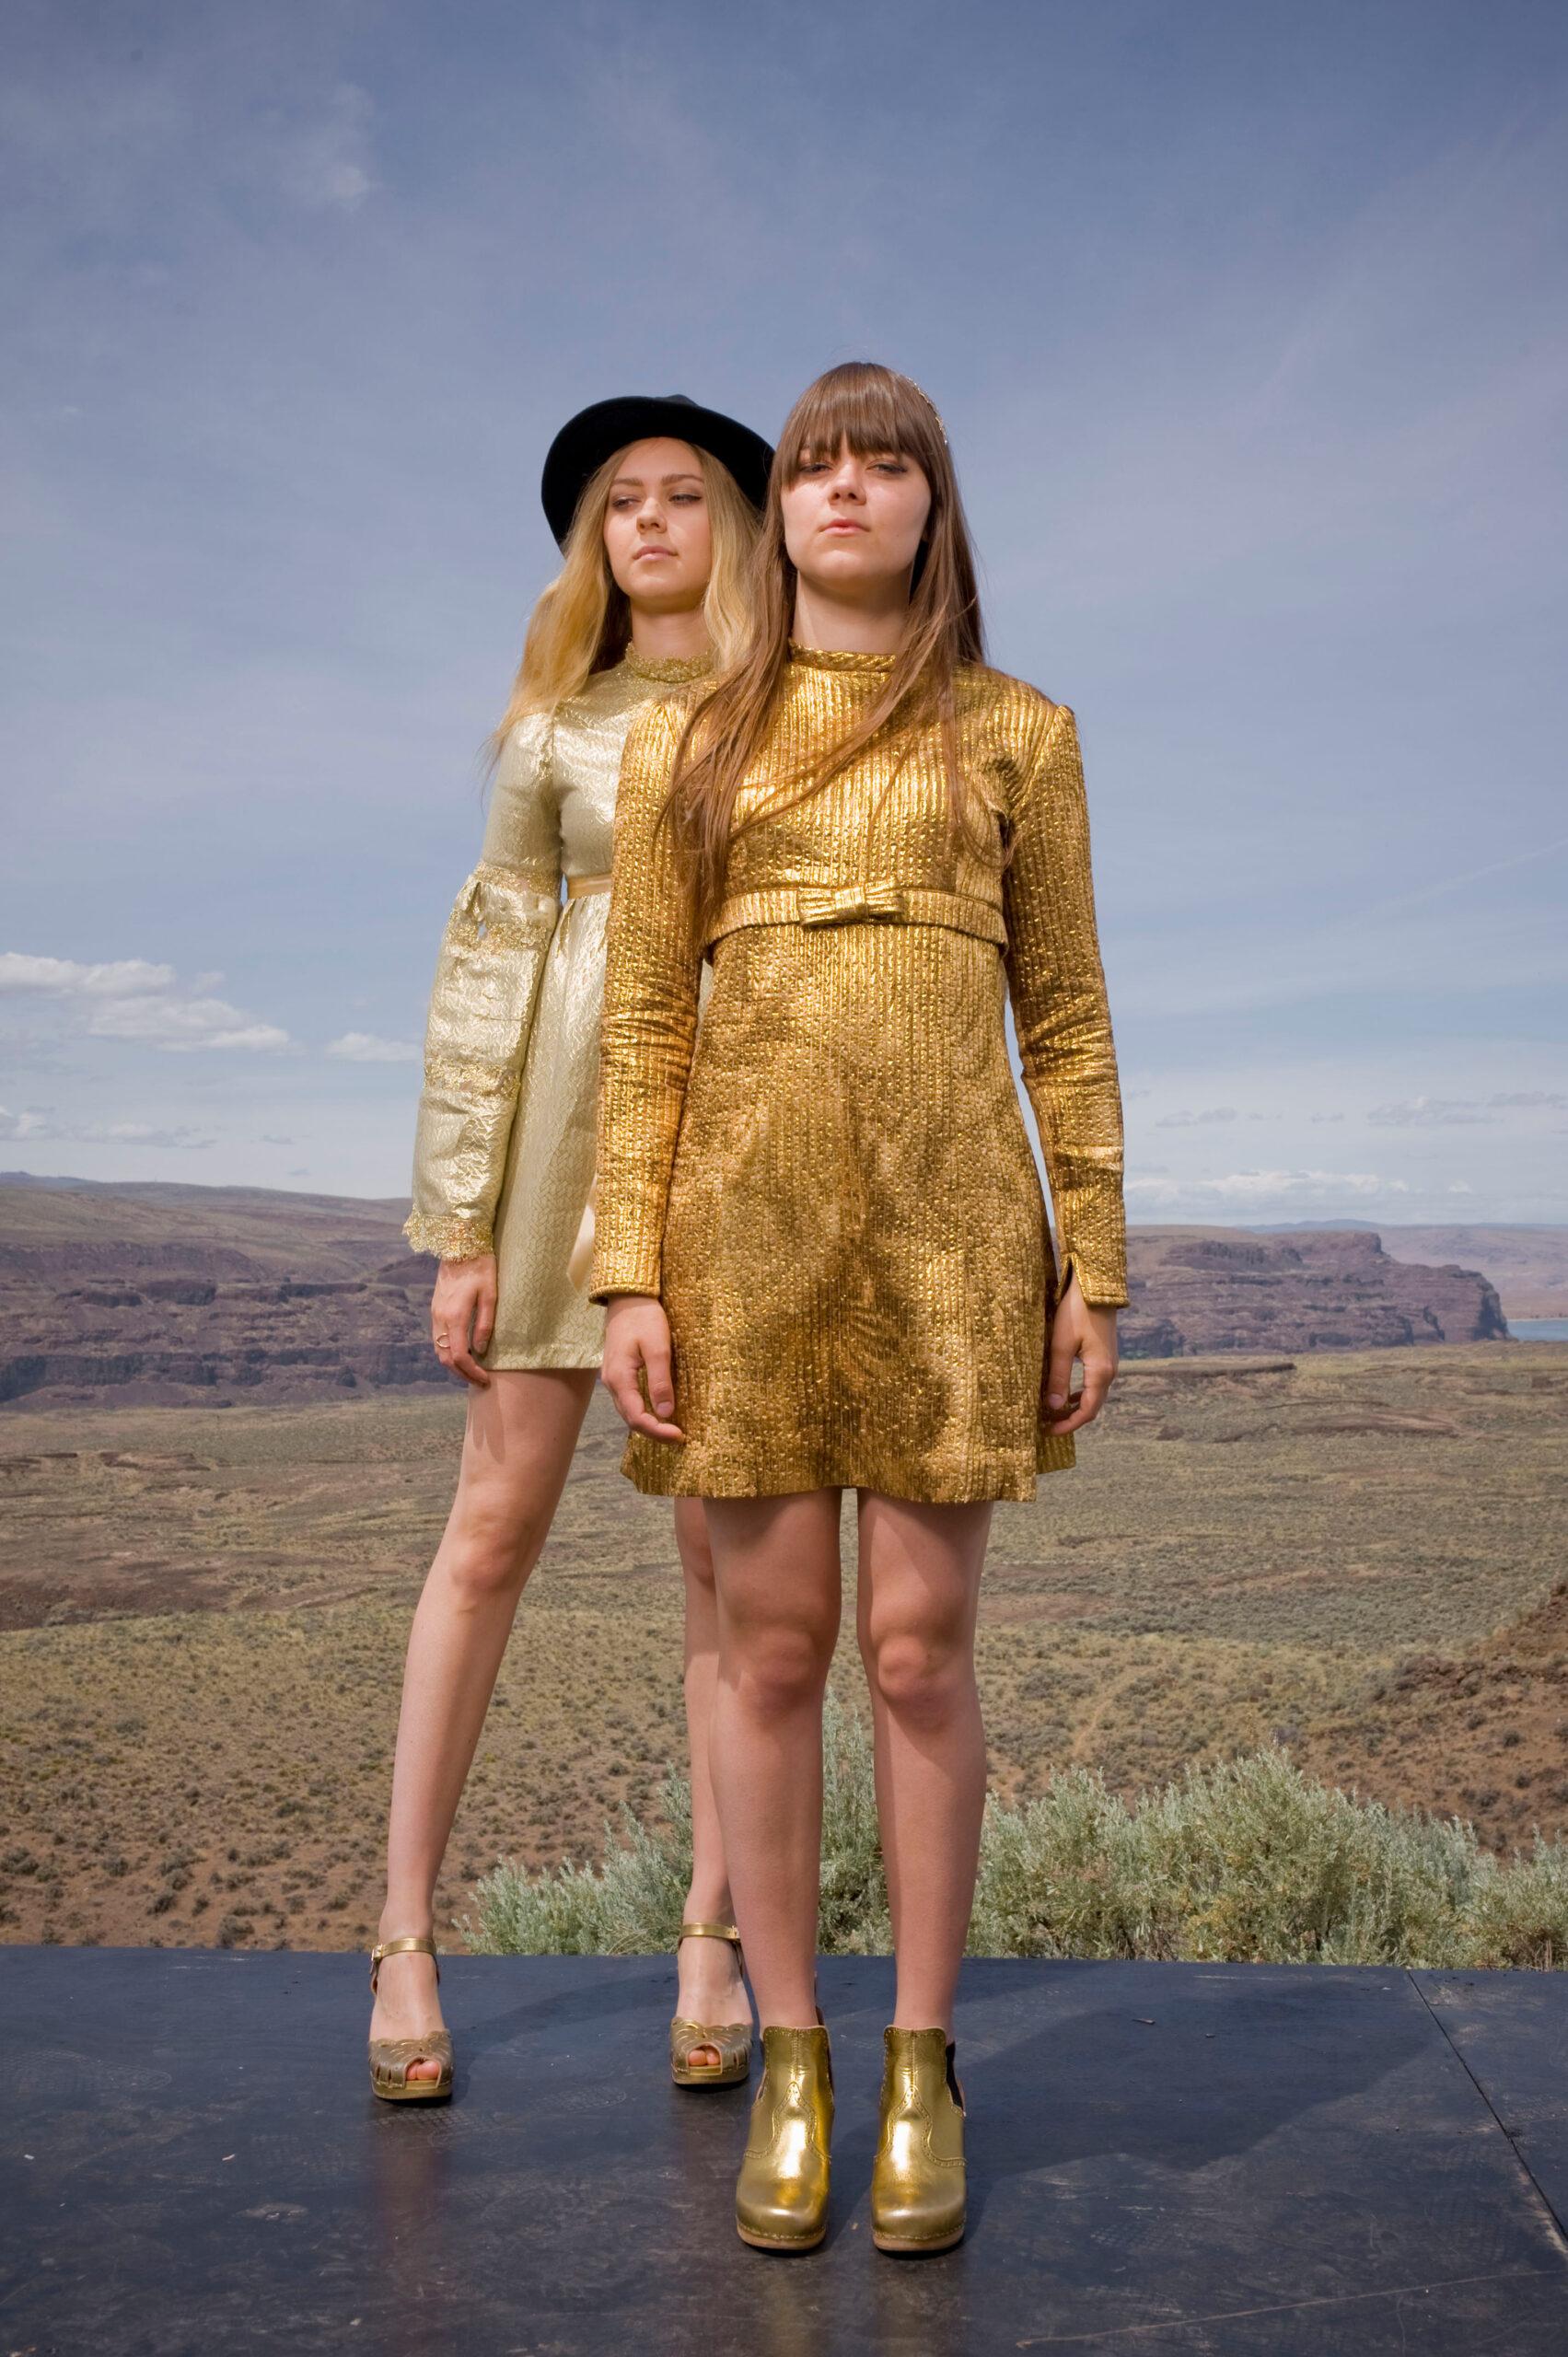 The two sisters of First Aid Kit posing against a backdrop showing a vast landscape.